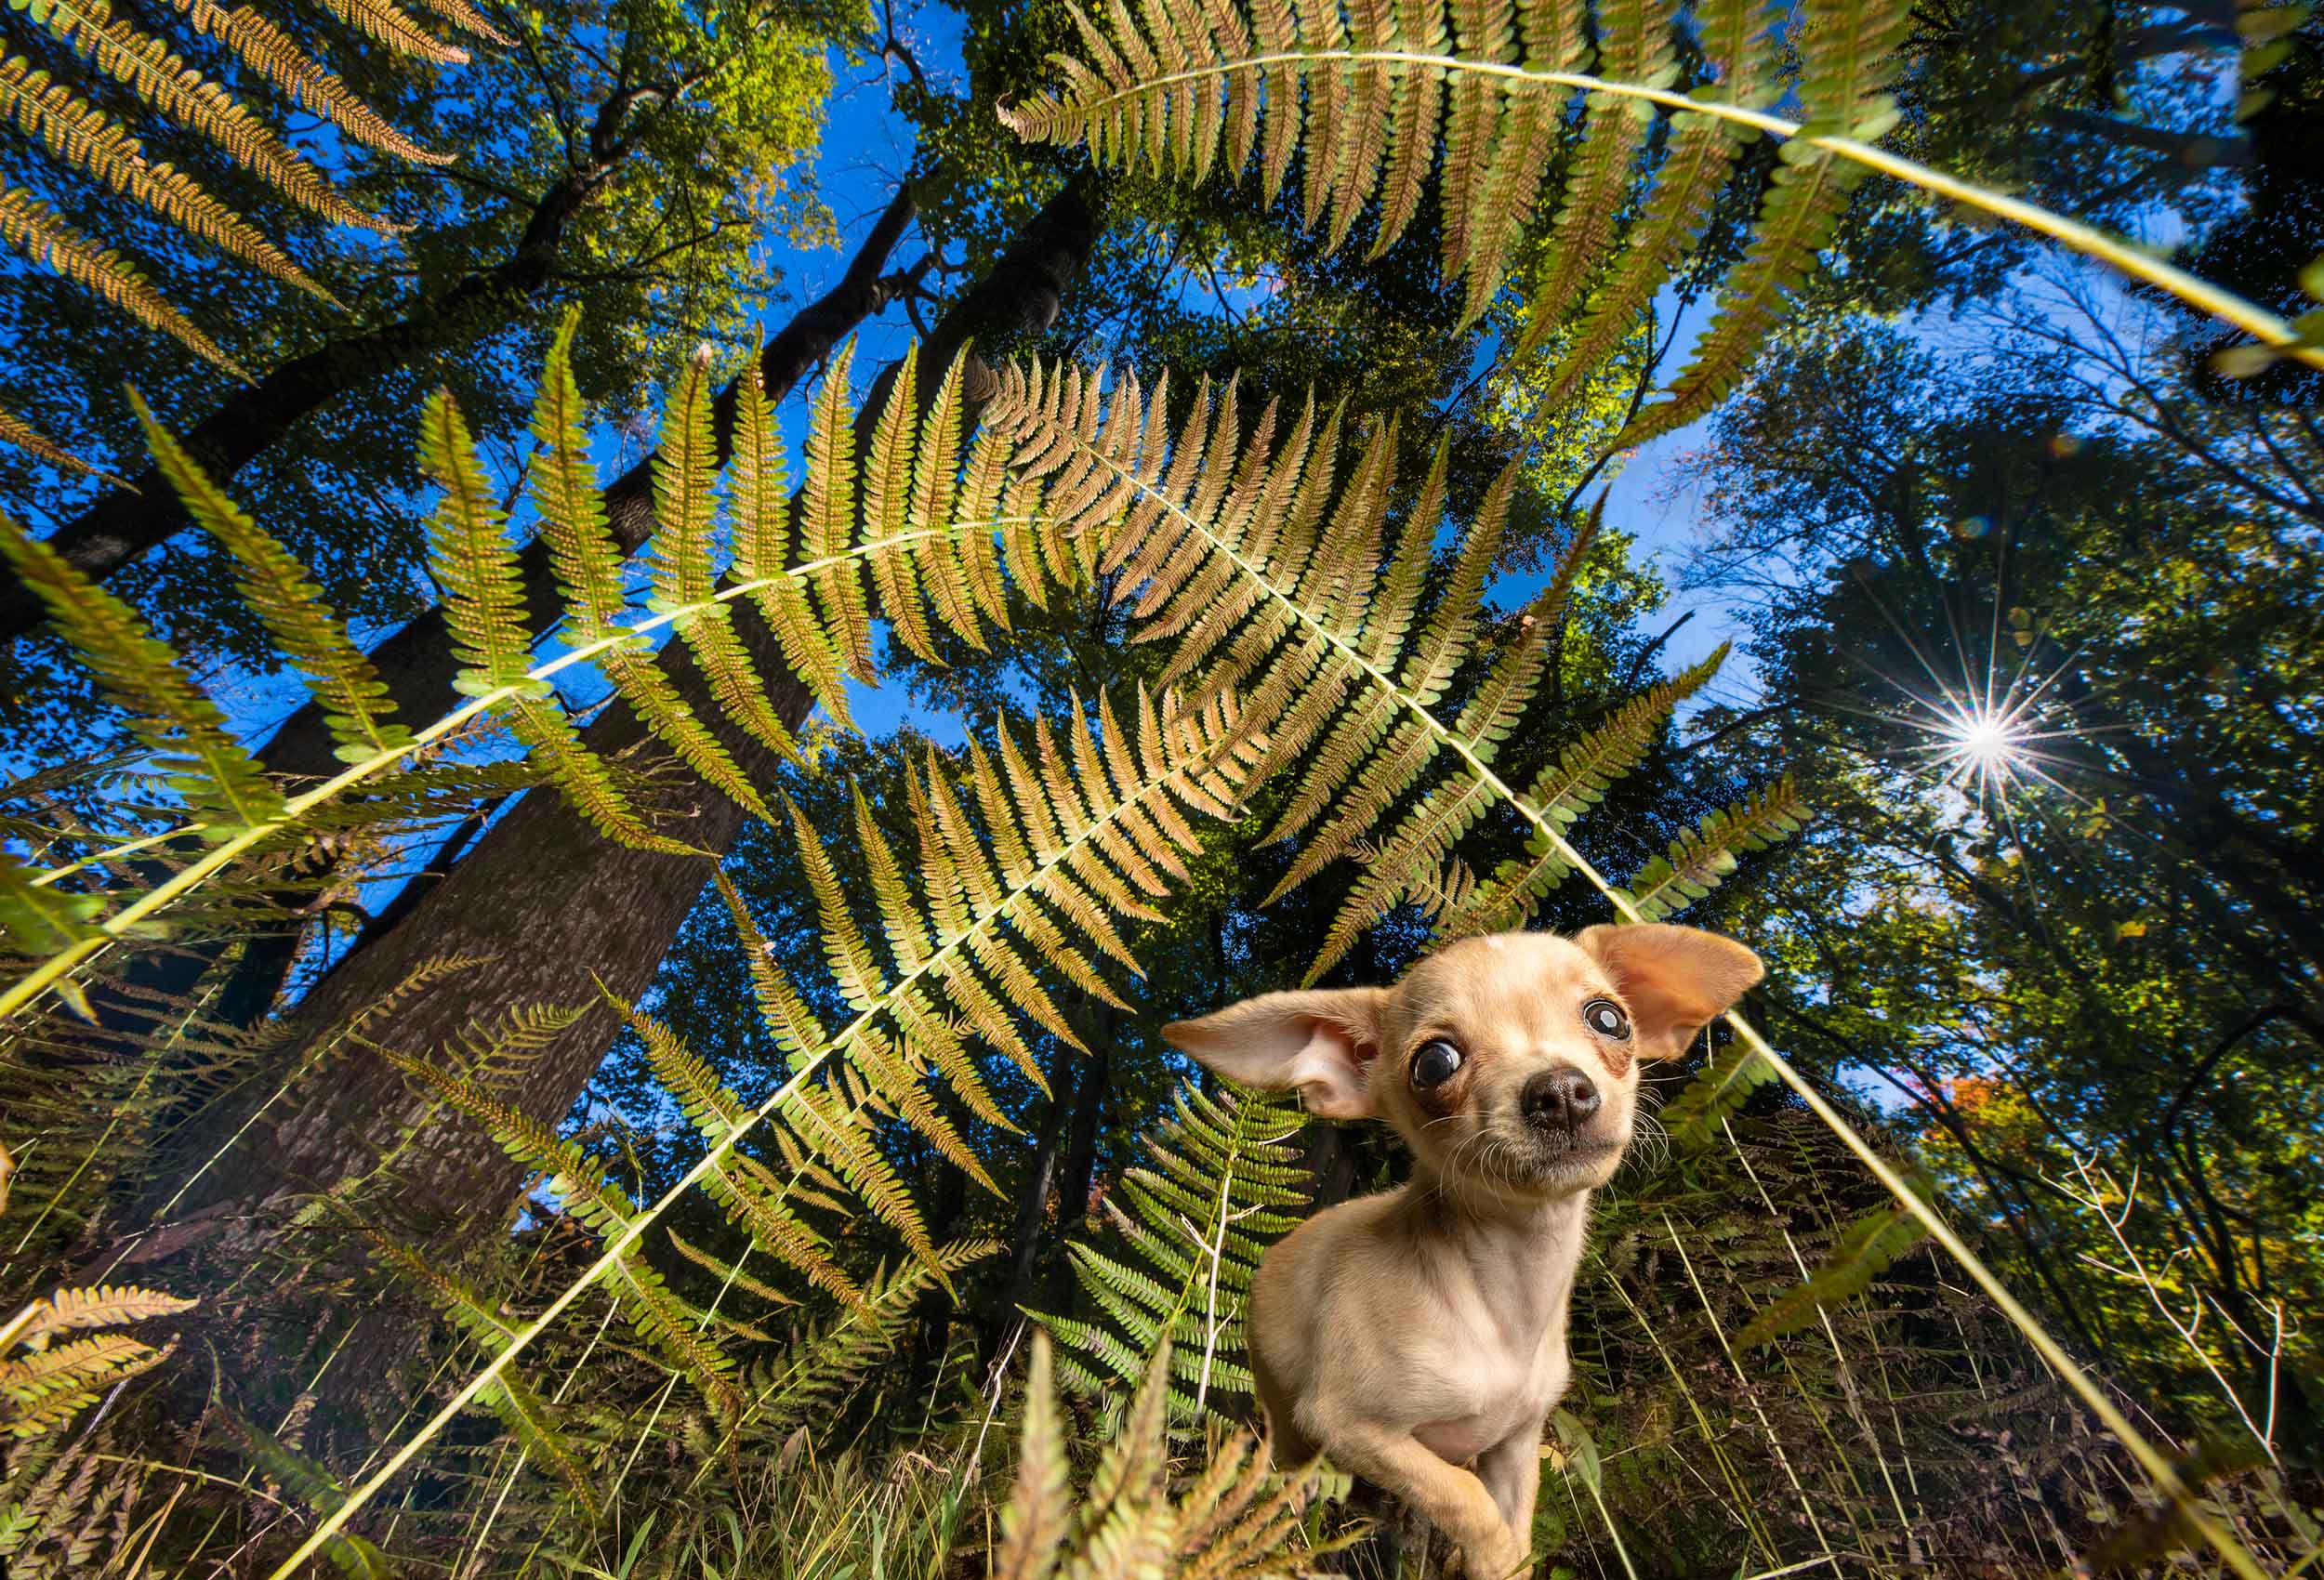 A Chihuahua dog under a giant fern in the green forest